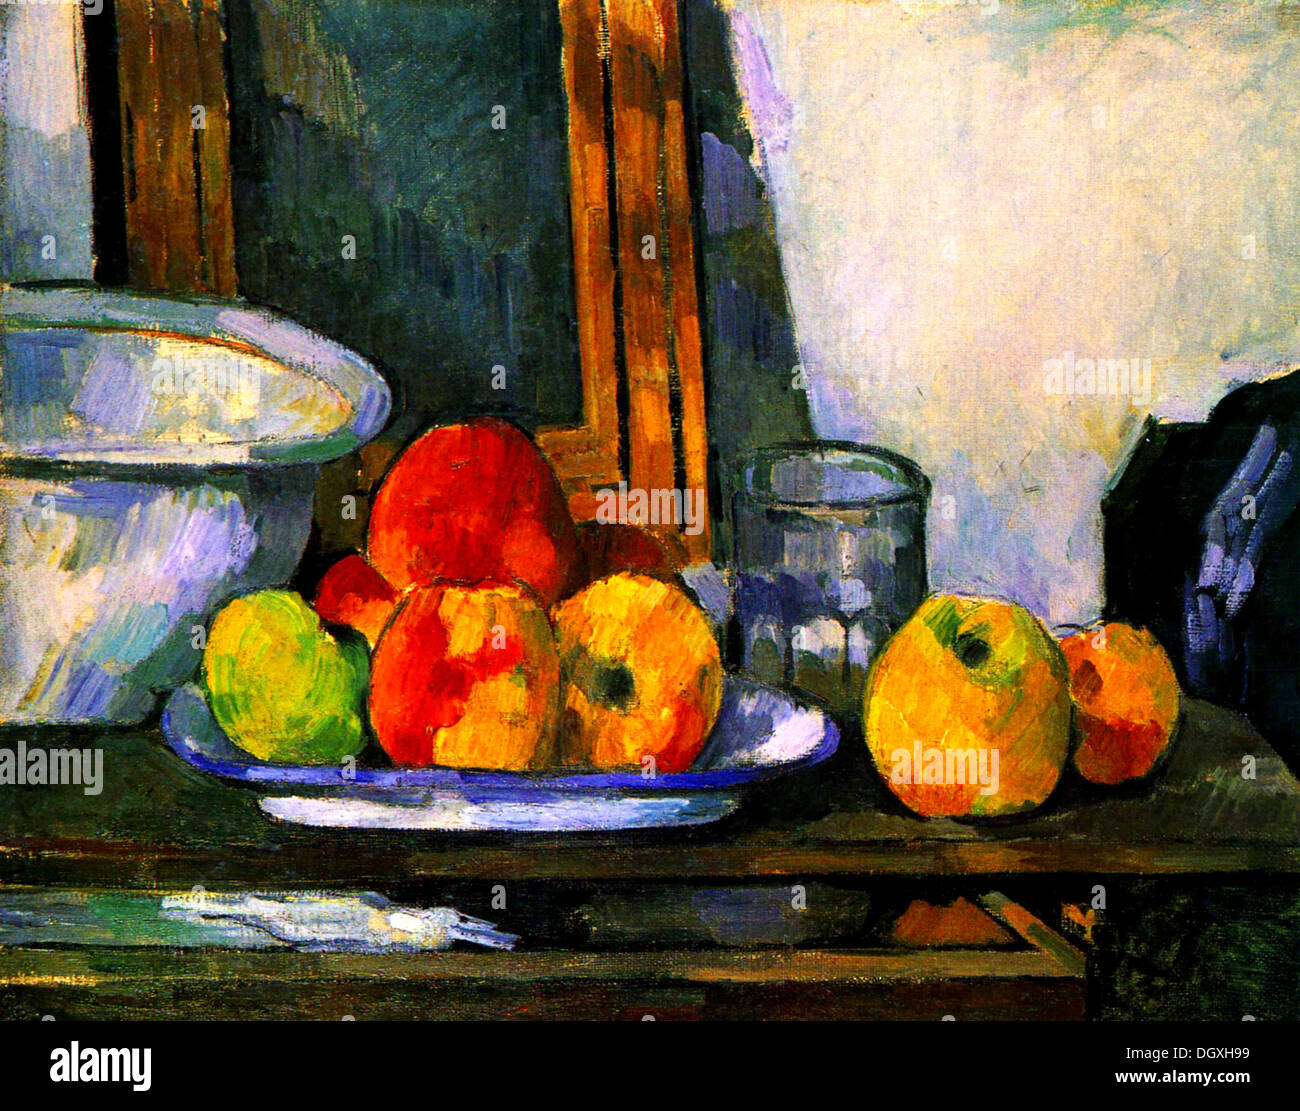 Still Life with an Open Drawer  - by Paul Cézanne, 1879 Stock Photo